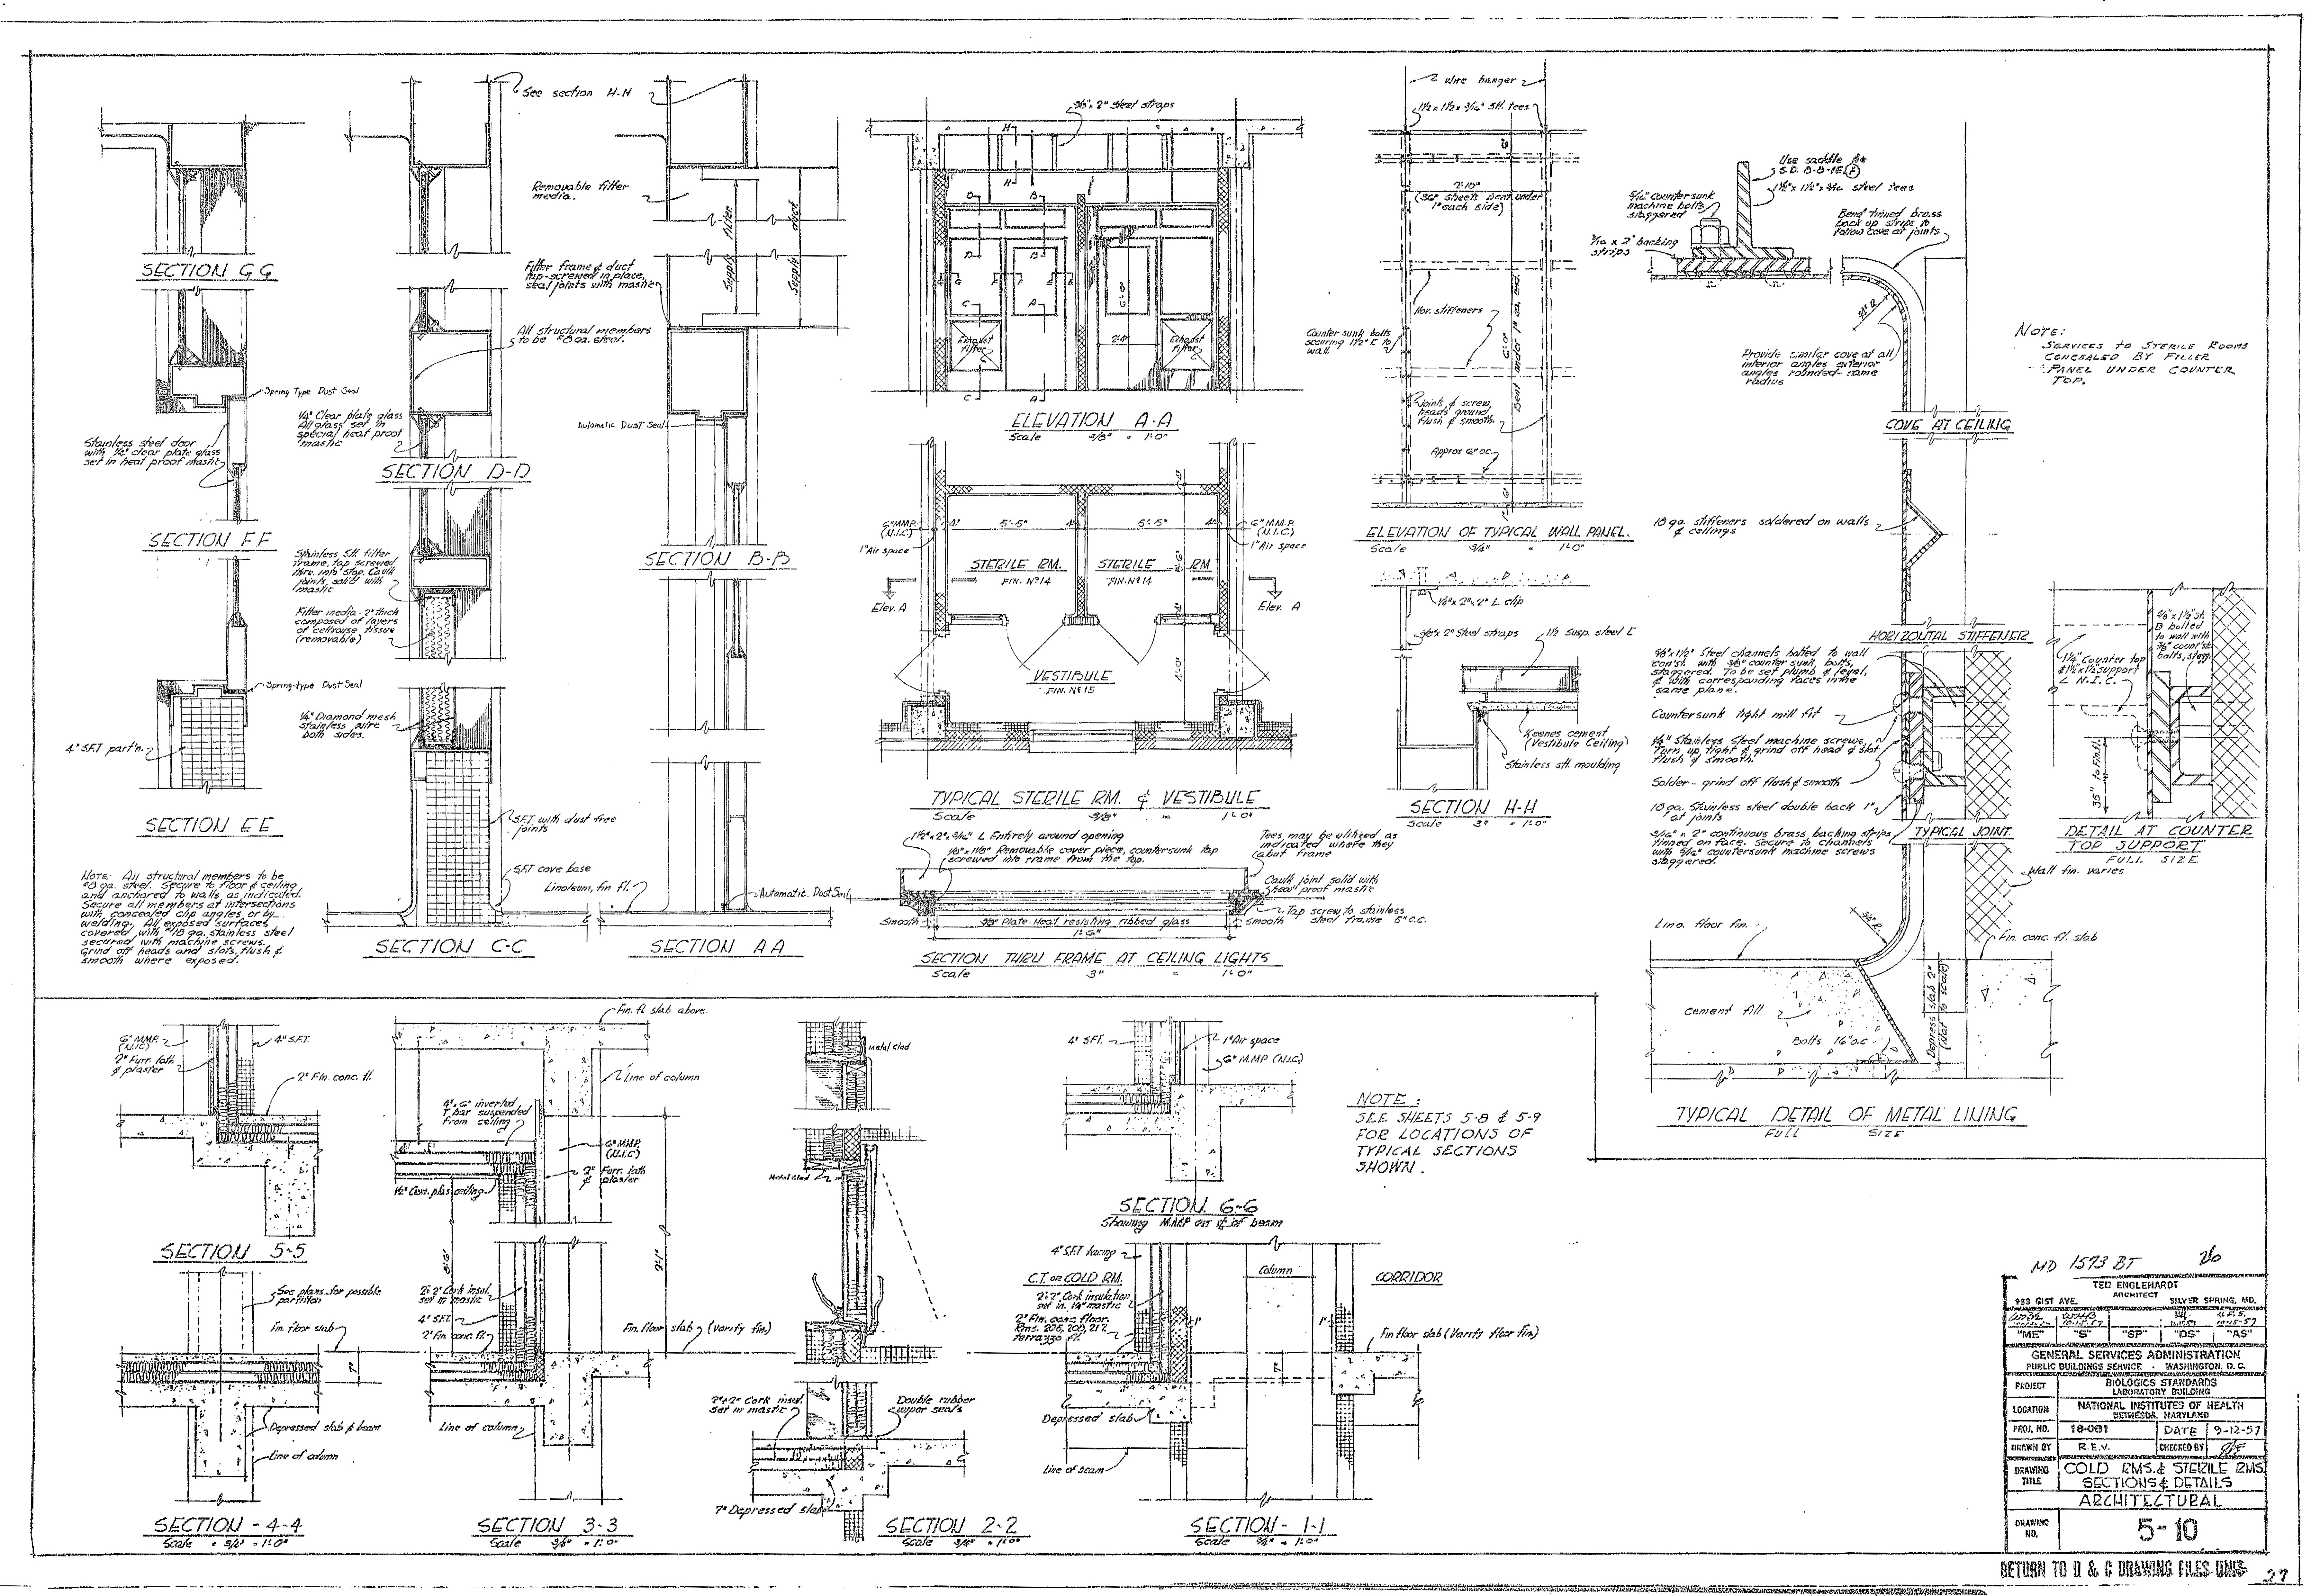 Cold Rooms and Sterile Rooms Sections and Details Drawing of Building 29